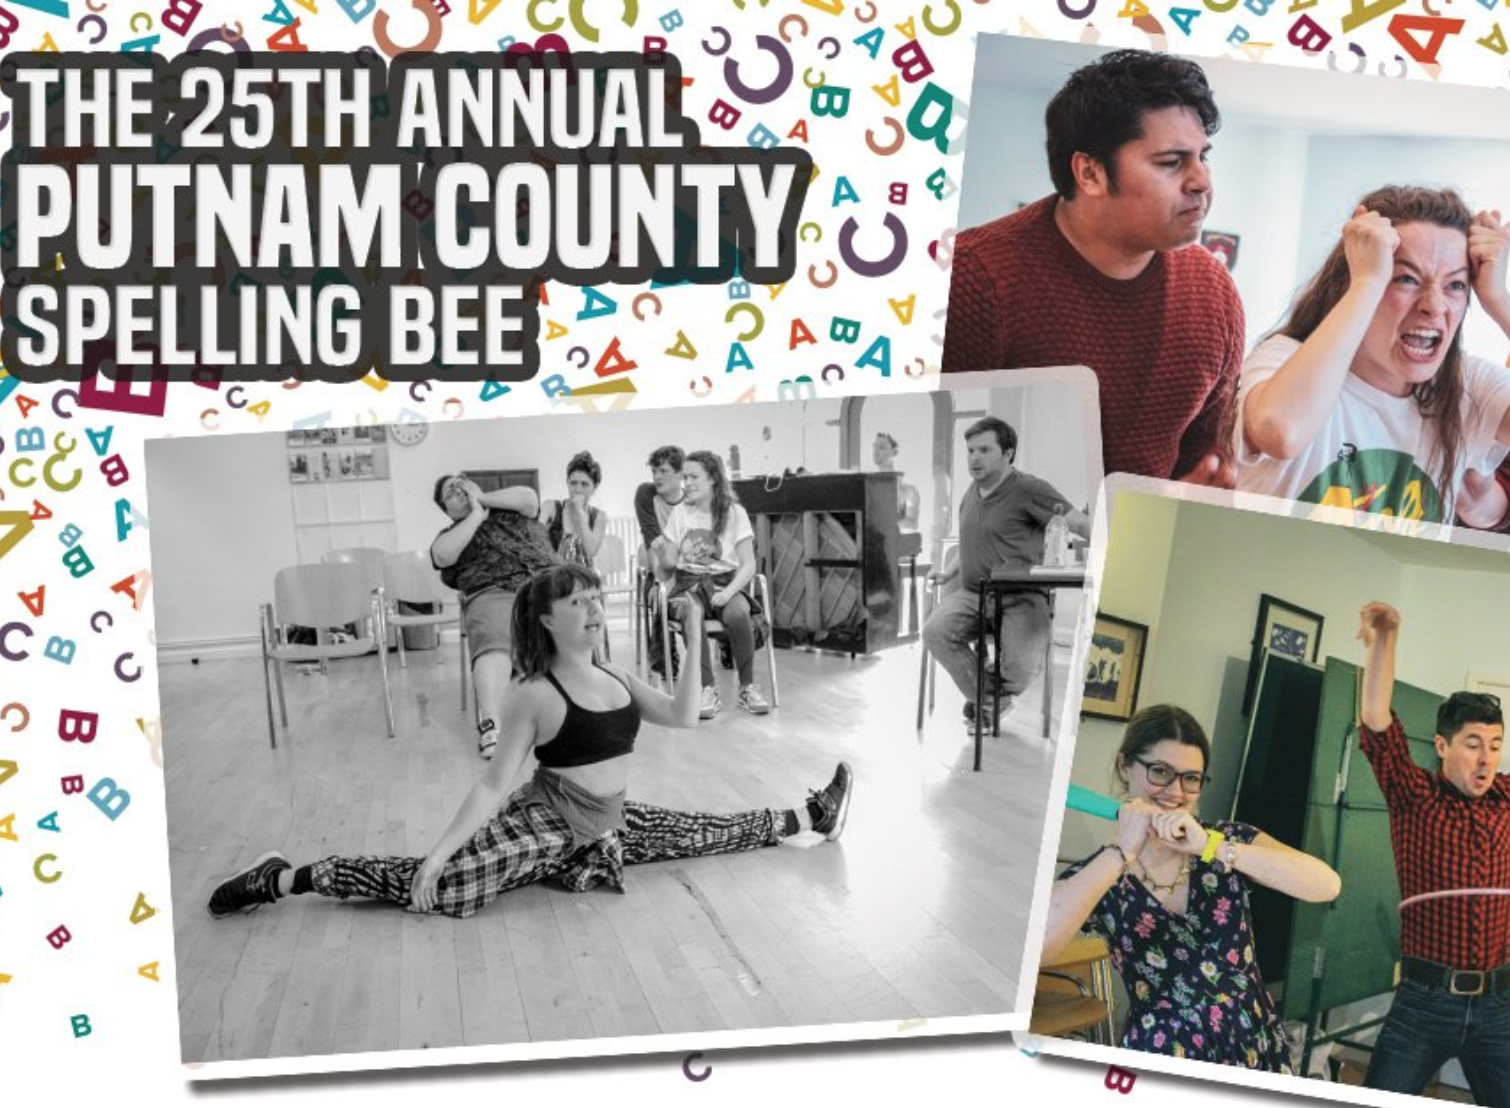 are-you-ready-spellers-here-s-who-s-competing-in-the-25th-annual-putnam-county-spelling-bee-at-drayton-arms